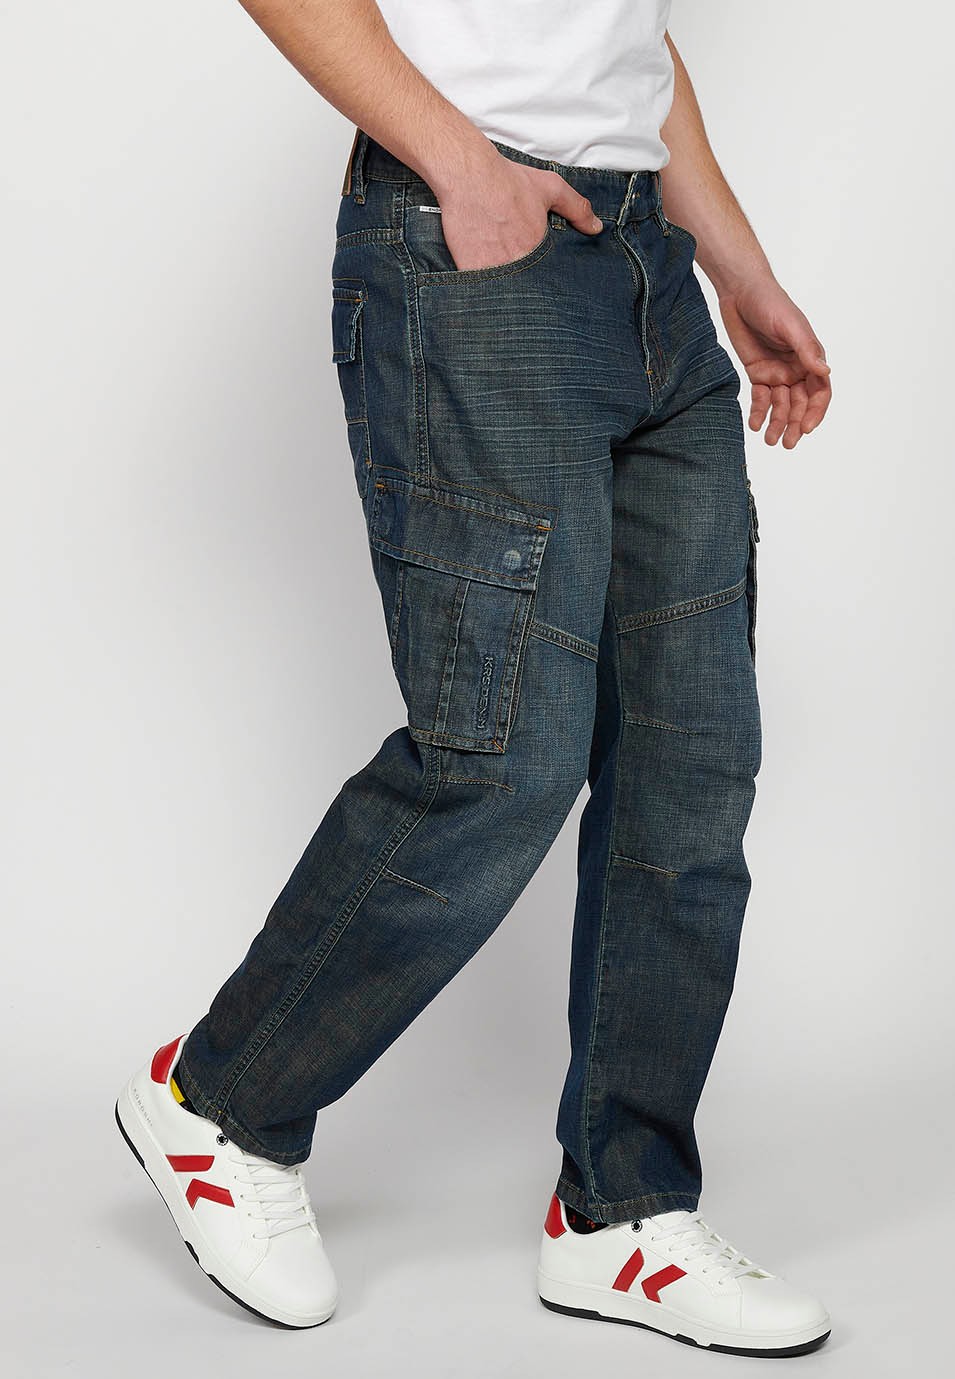 Long Cargo Pants with Front Zipper and Button Closure with Side Flap Pockets in Dark Blue for Men 1